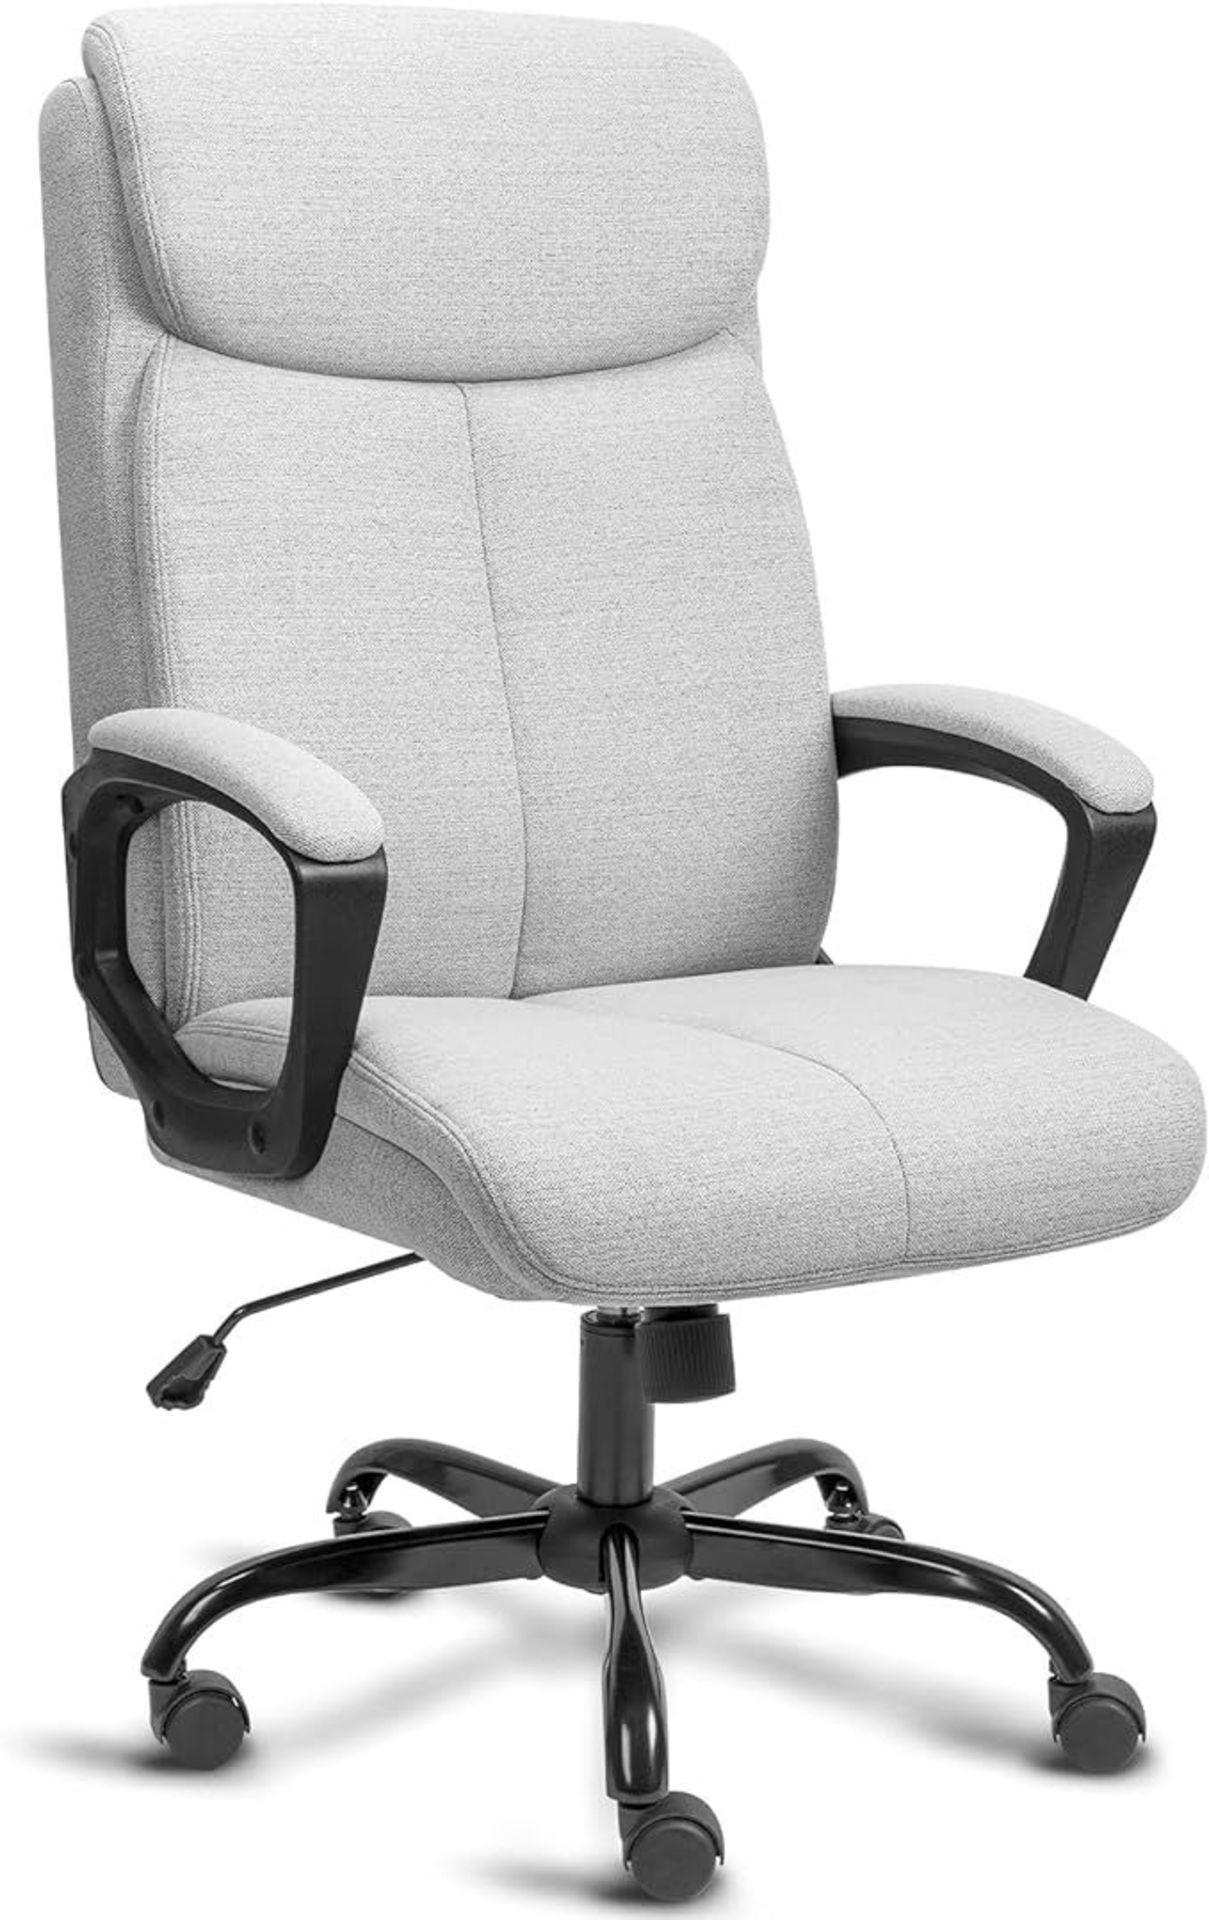 BASETBL Executive Office Chair Fabric Chair, Ergonomic Computer Desk Chair, Multi-zone Support